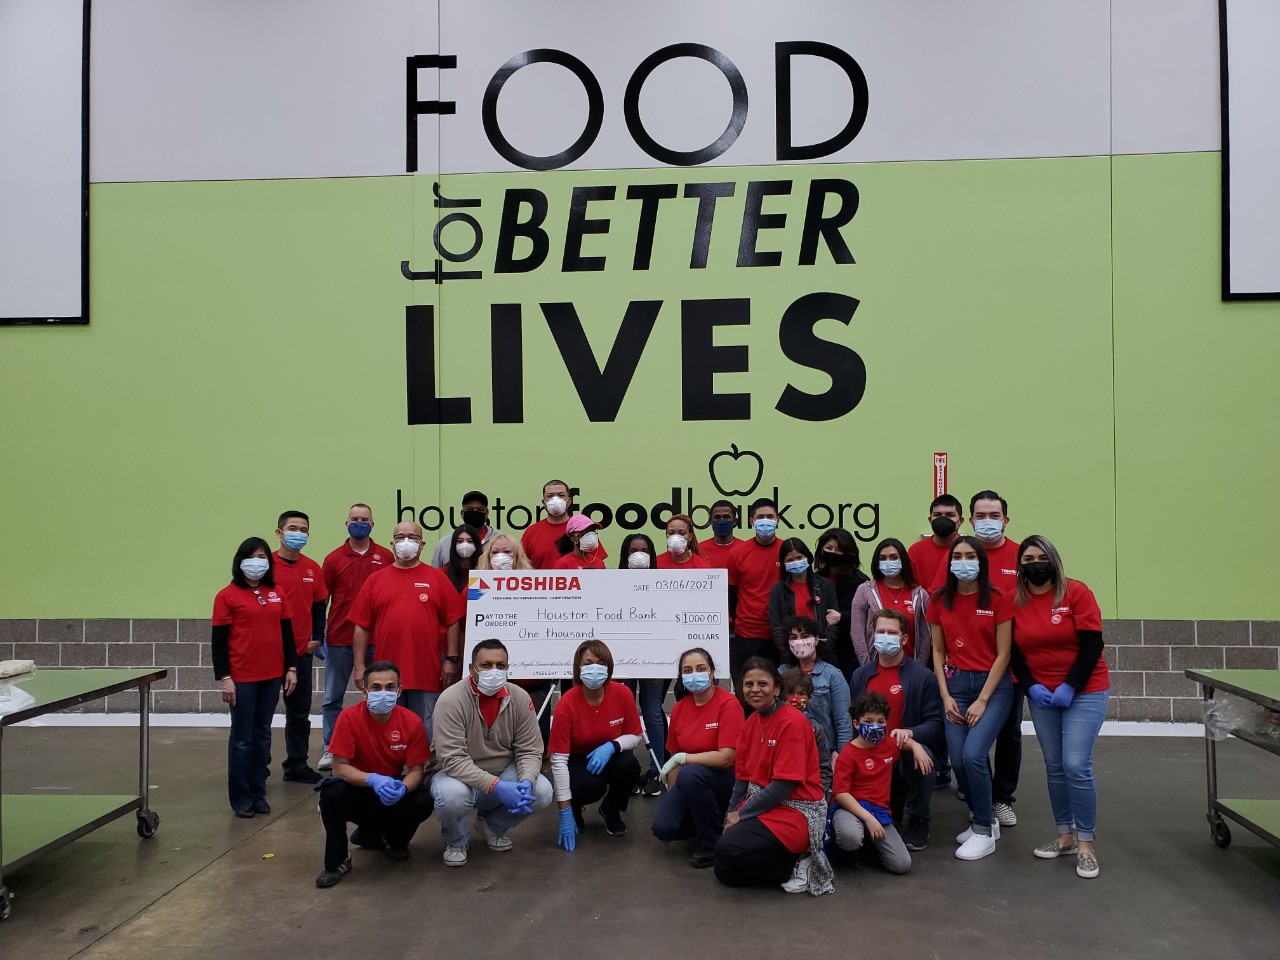 Toshiba International Corporation partnered with the Houston Food Bank for a volunteer event at their food distribution center.